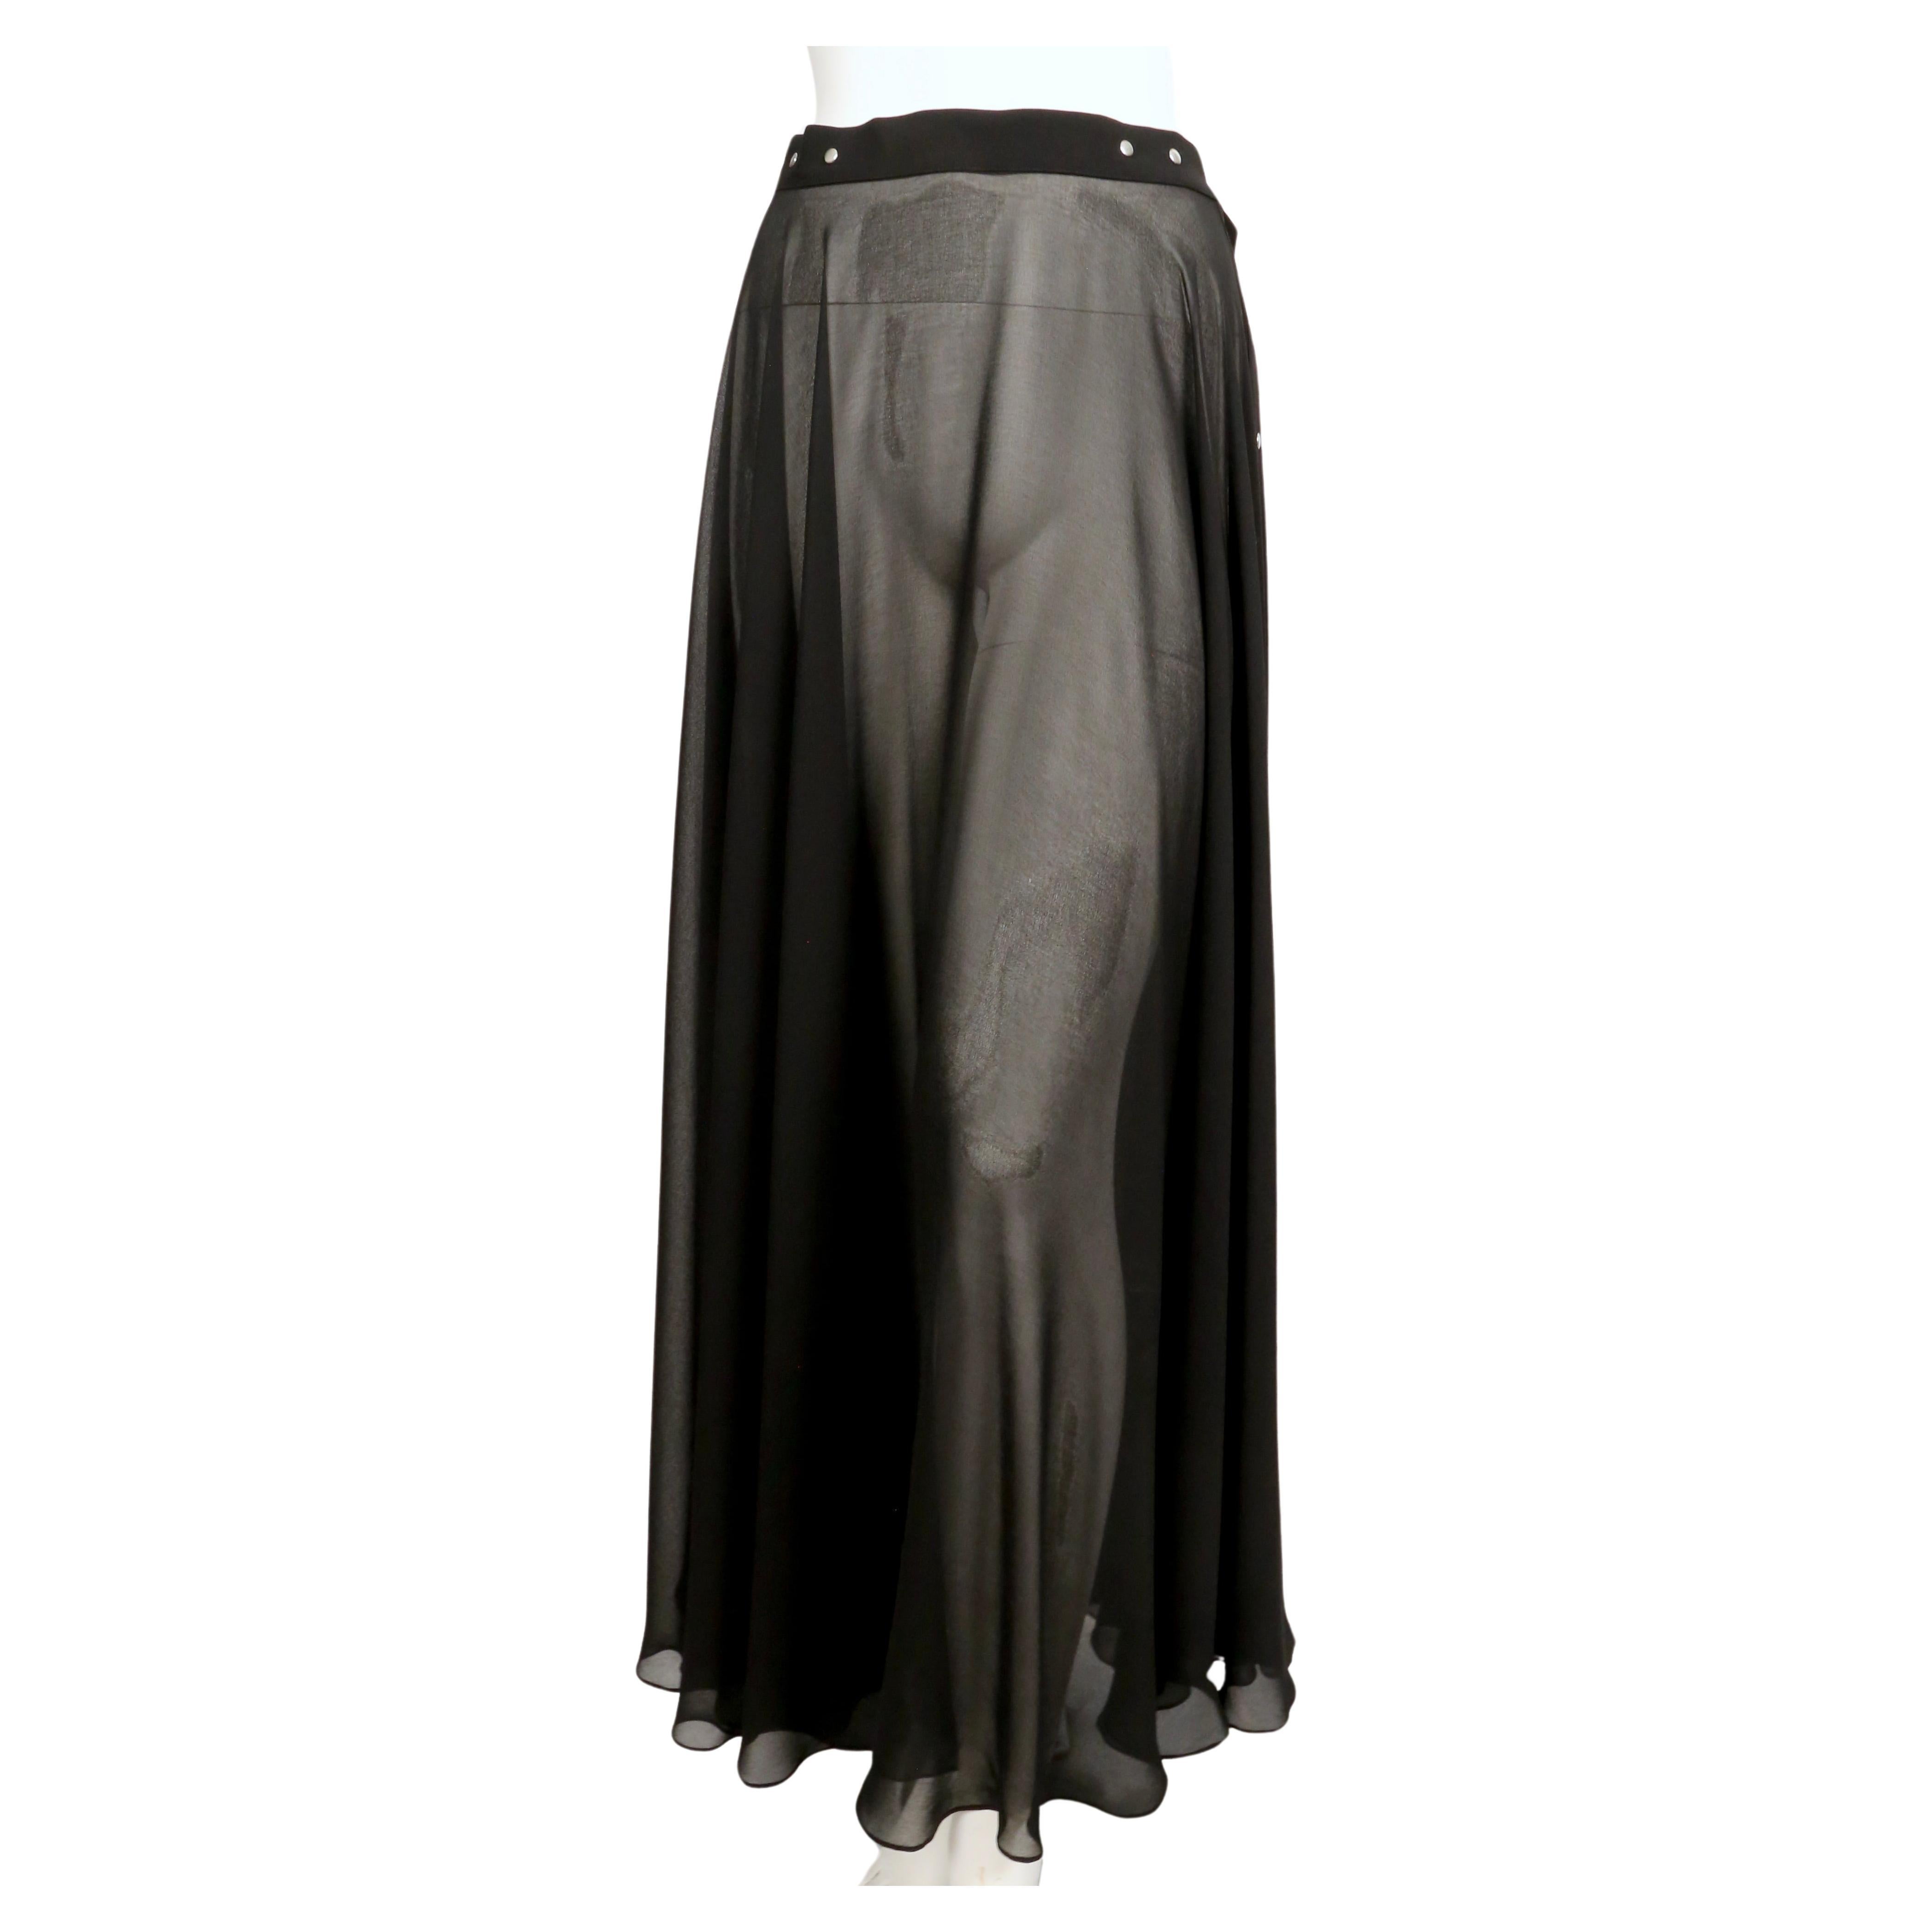 Black sheer maxi skirt with silver snap closure designed by Jean Paul Gaultier dating to the late 1990's. Fabric has a beautiful drape. No size label. Approximate measurements: waist 28.5